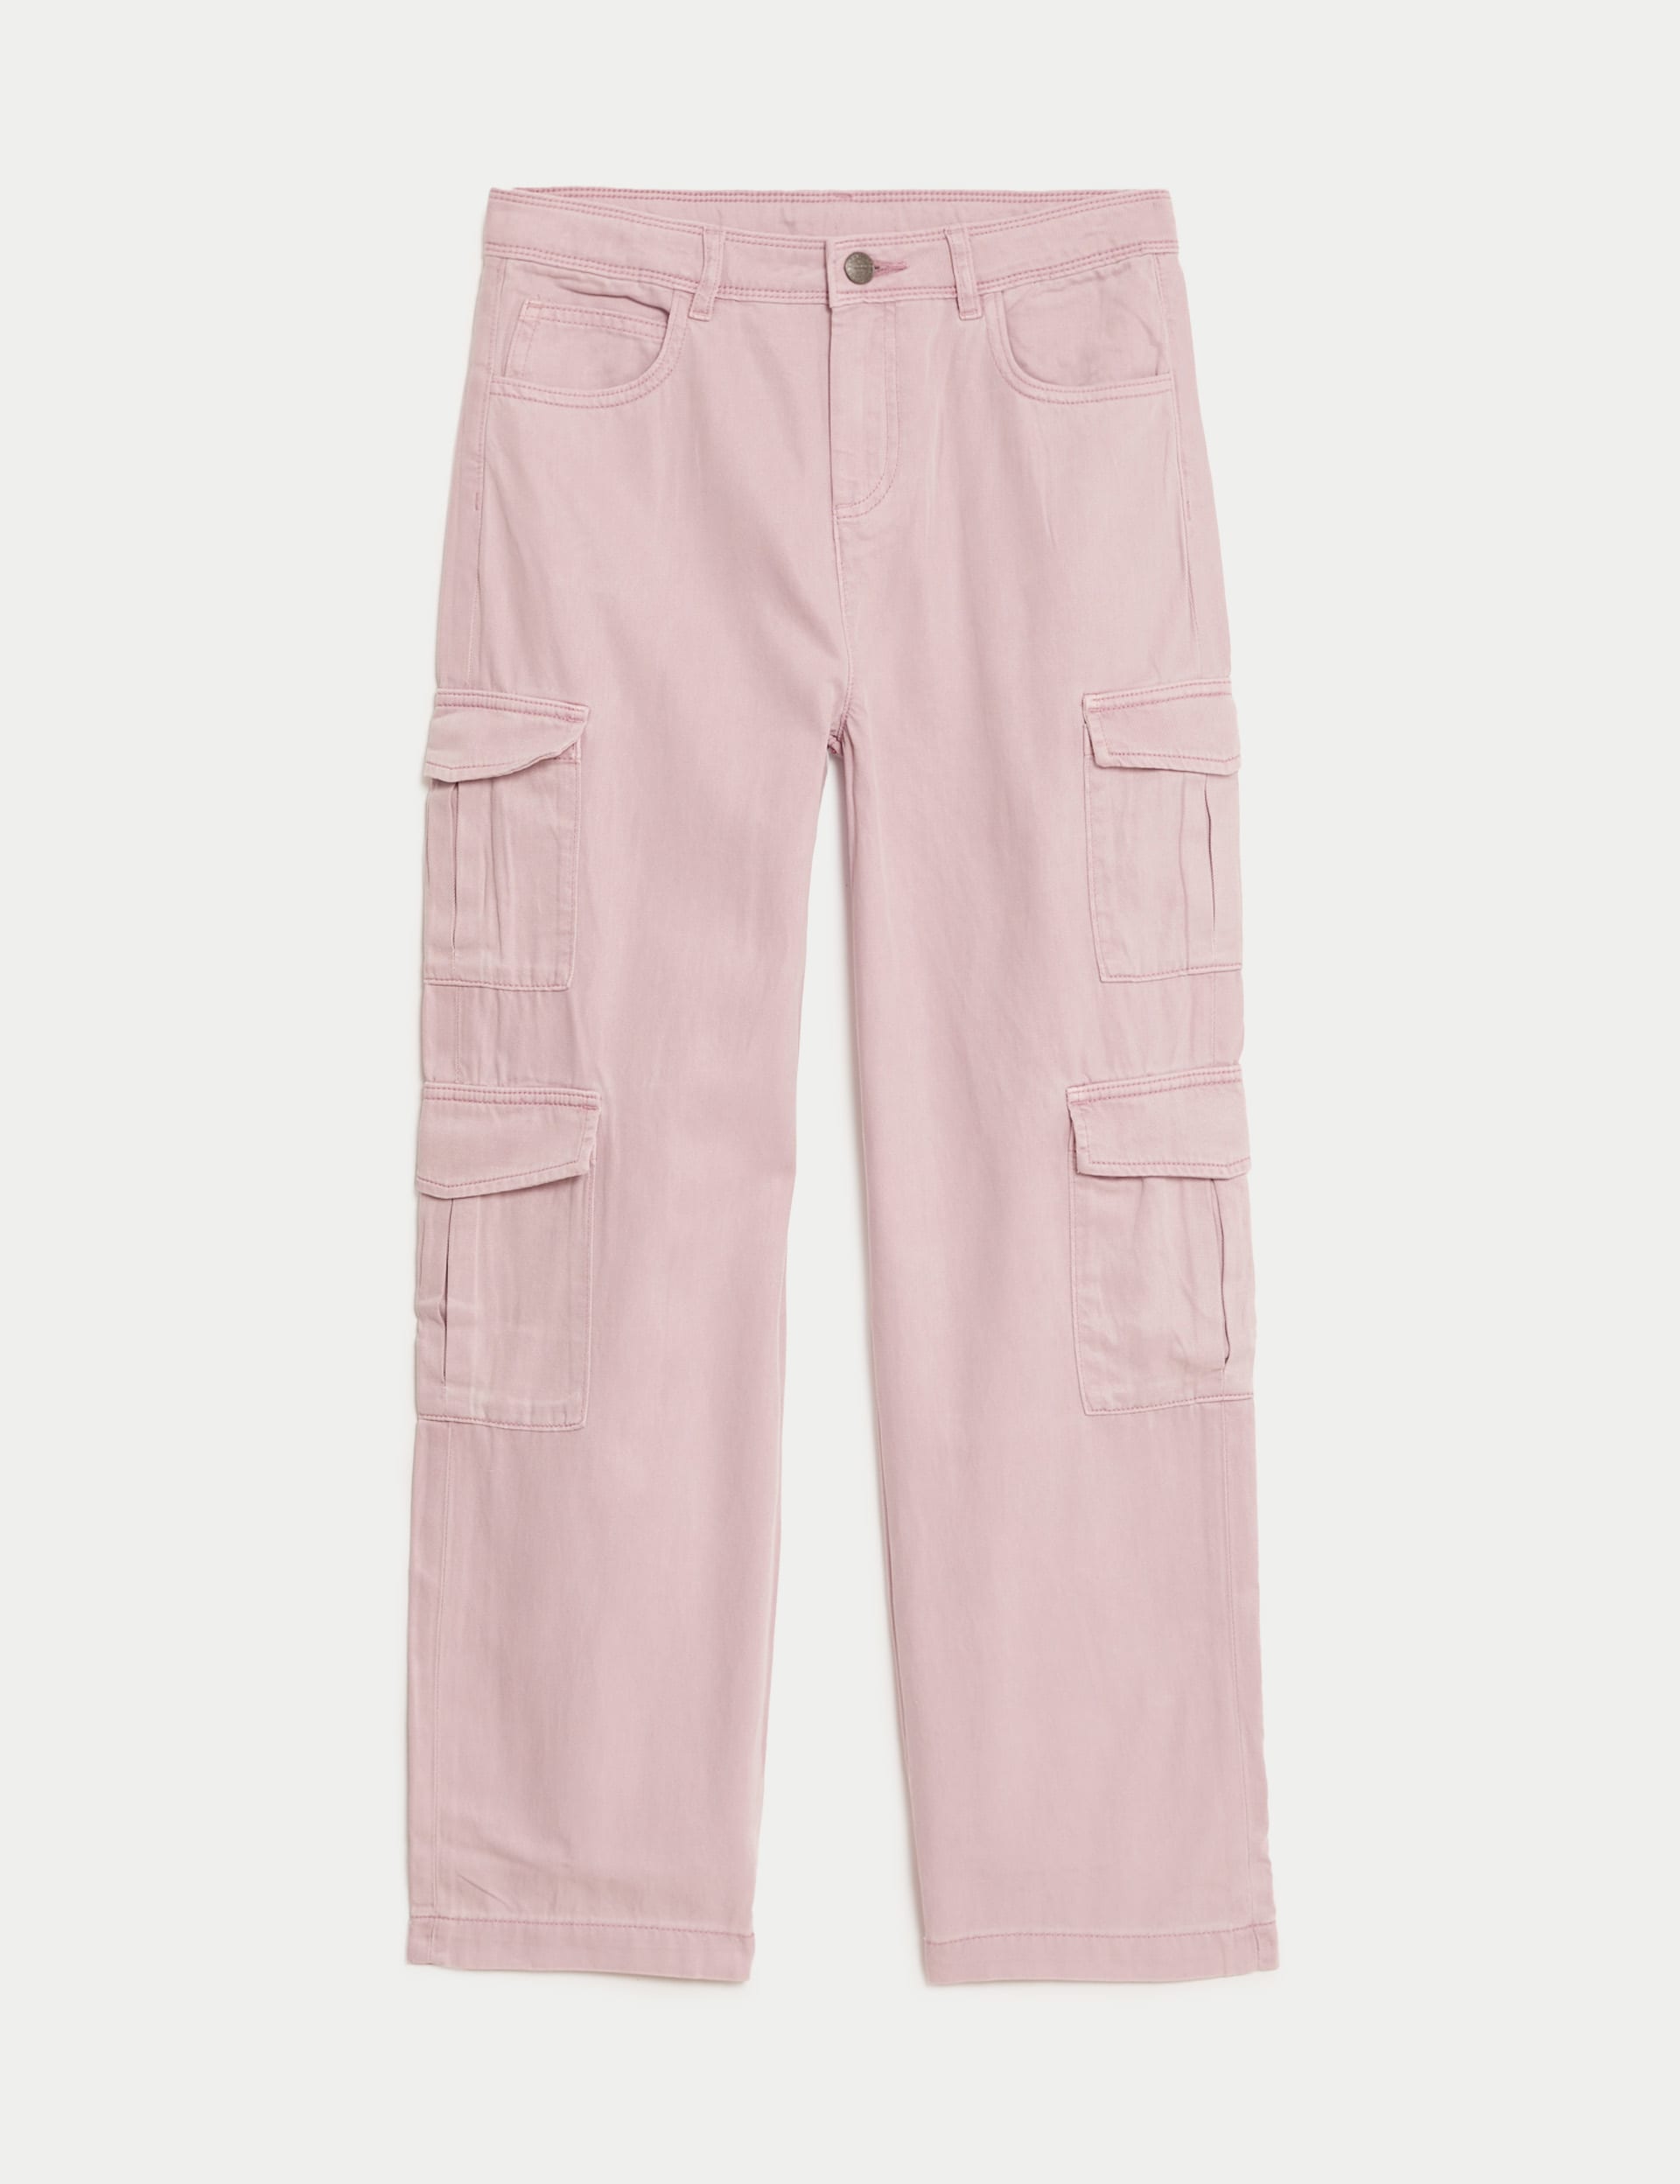 Cotton Rich Cargo Trousers (6-16 Yrs)